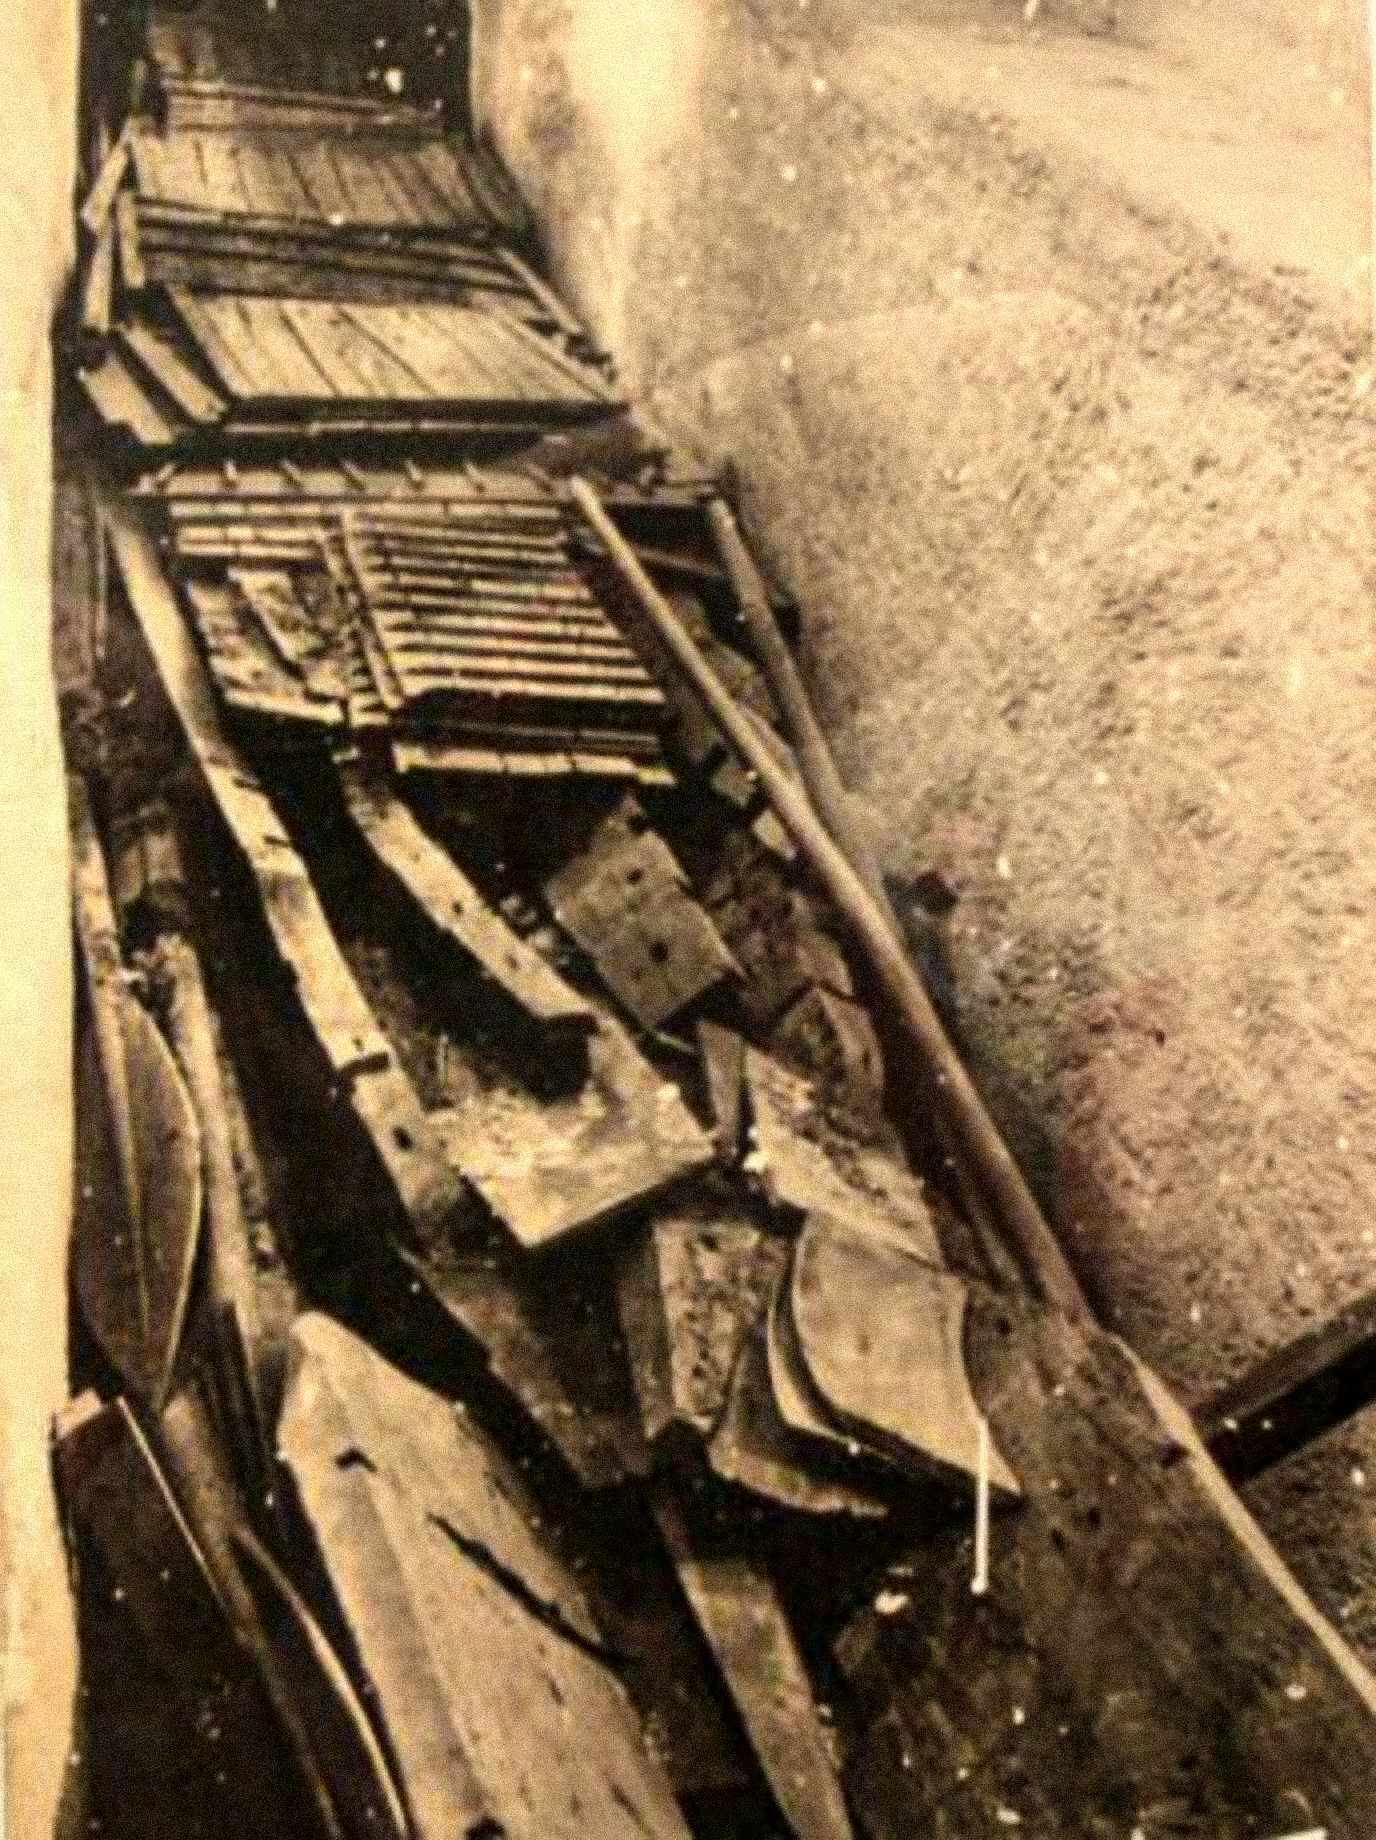 Solar boat of Kheops. Situation when discovered.